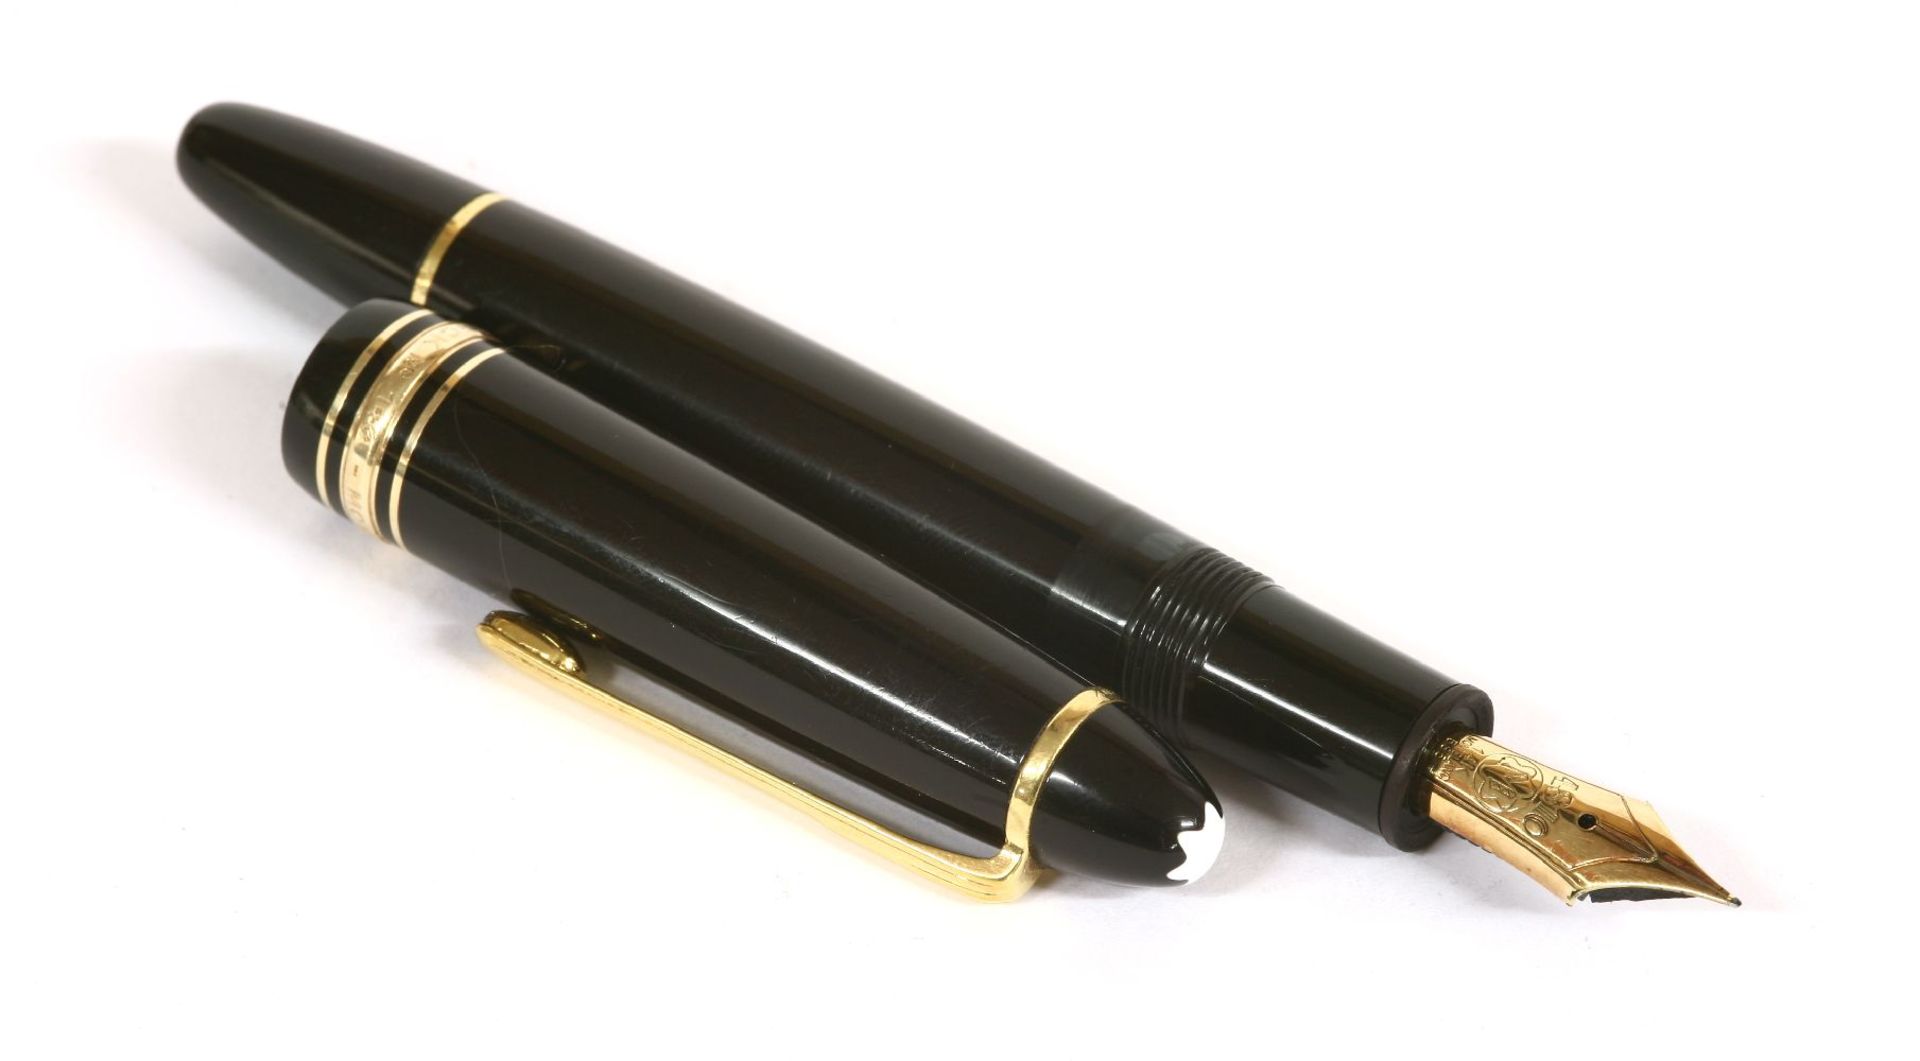 A Mont Blanc Meisterstück fountain pen,with a black barrel and cap, gold-plated banding and clip,